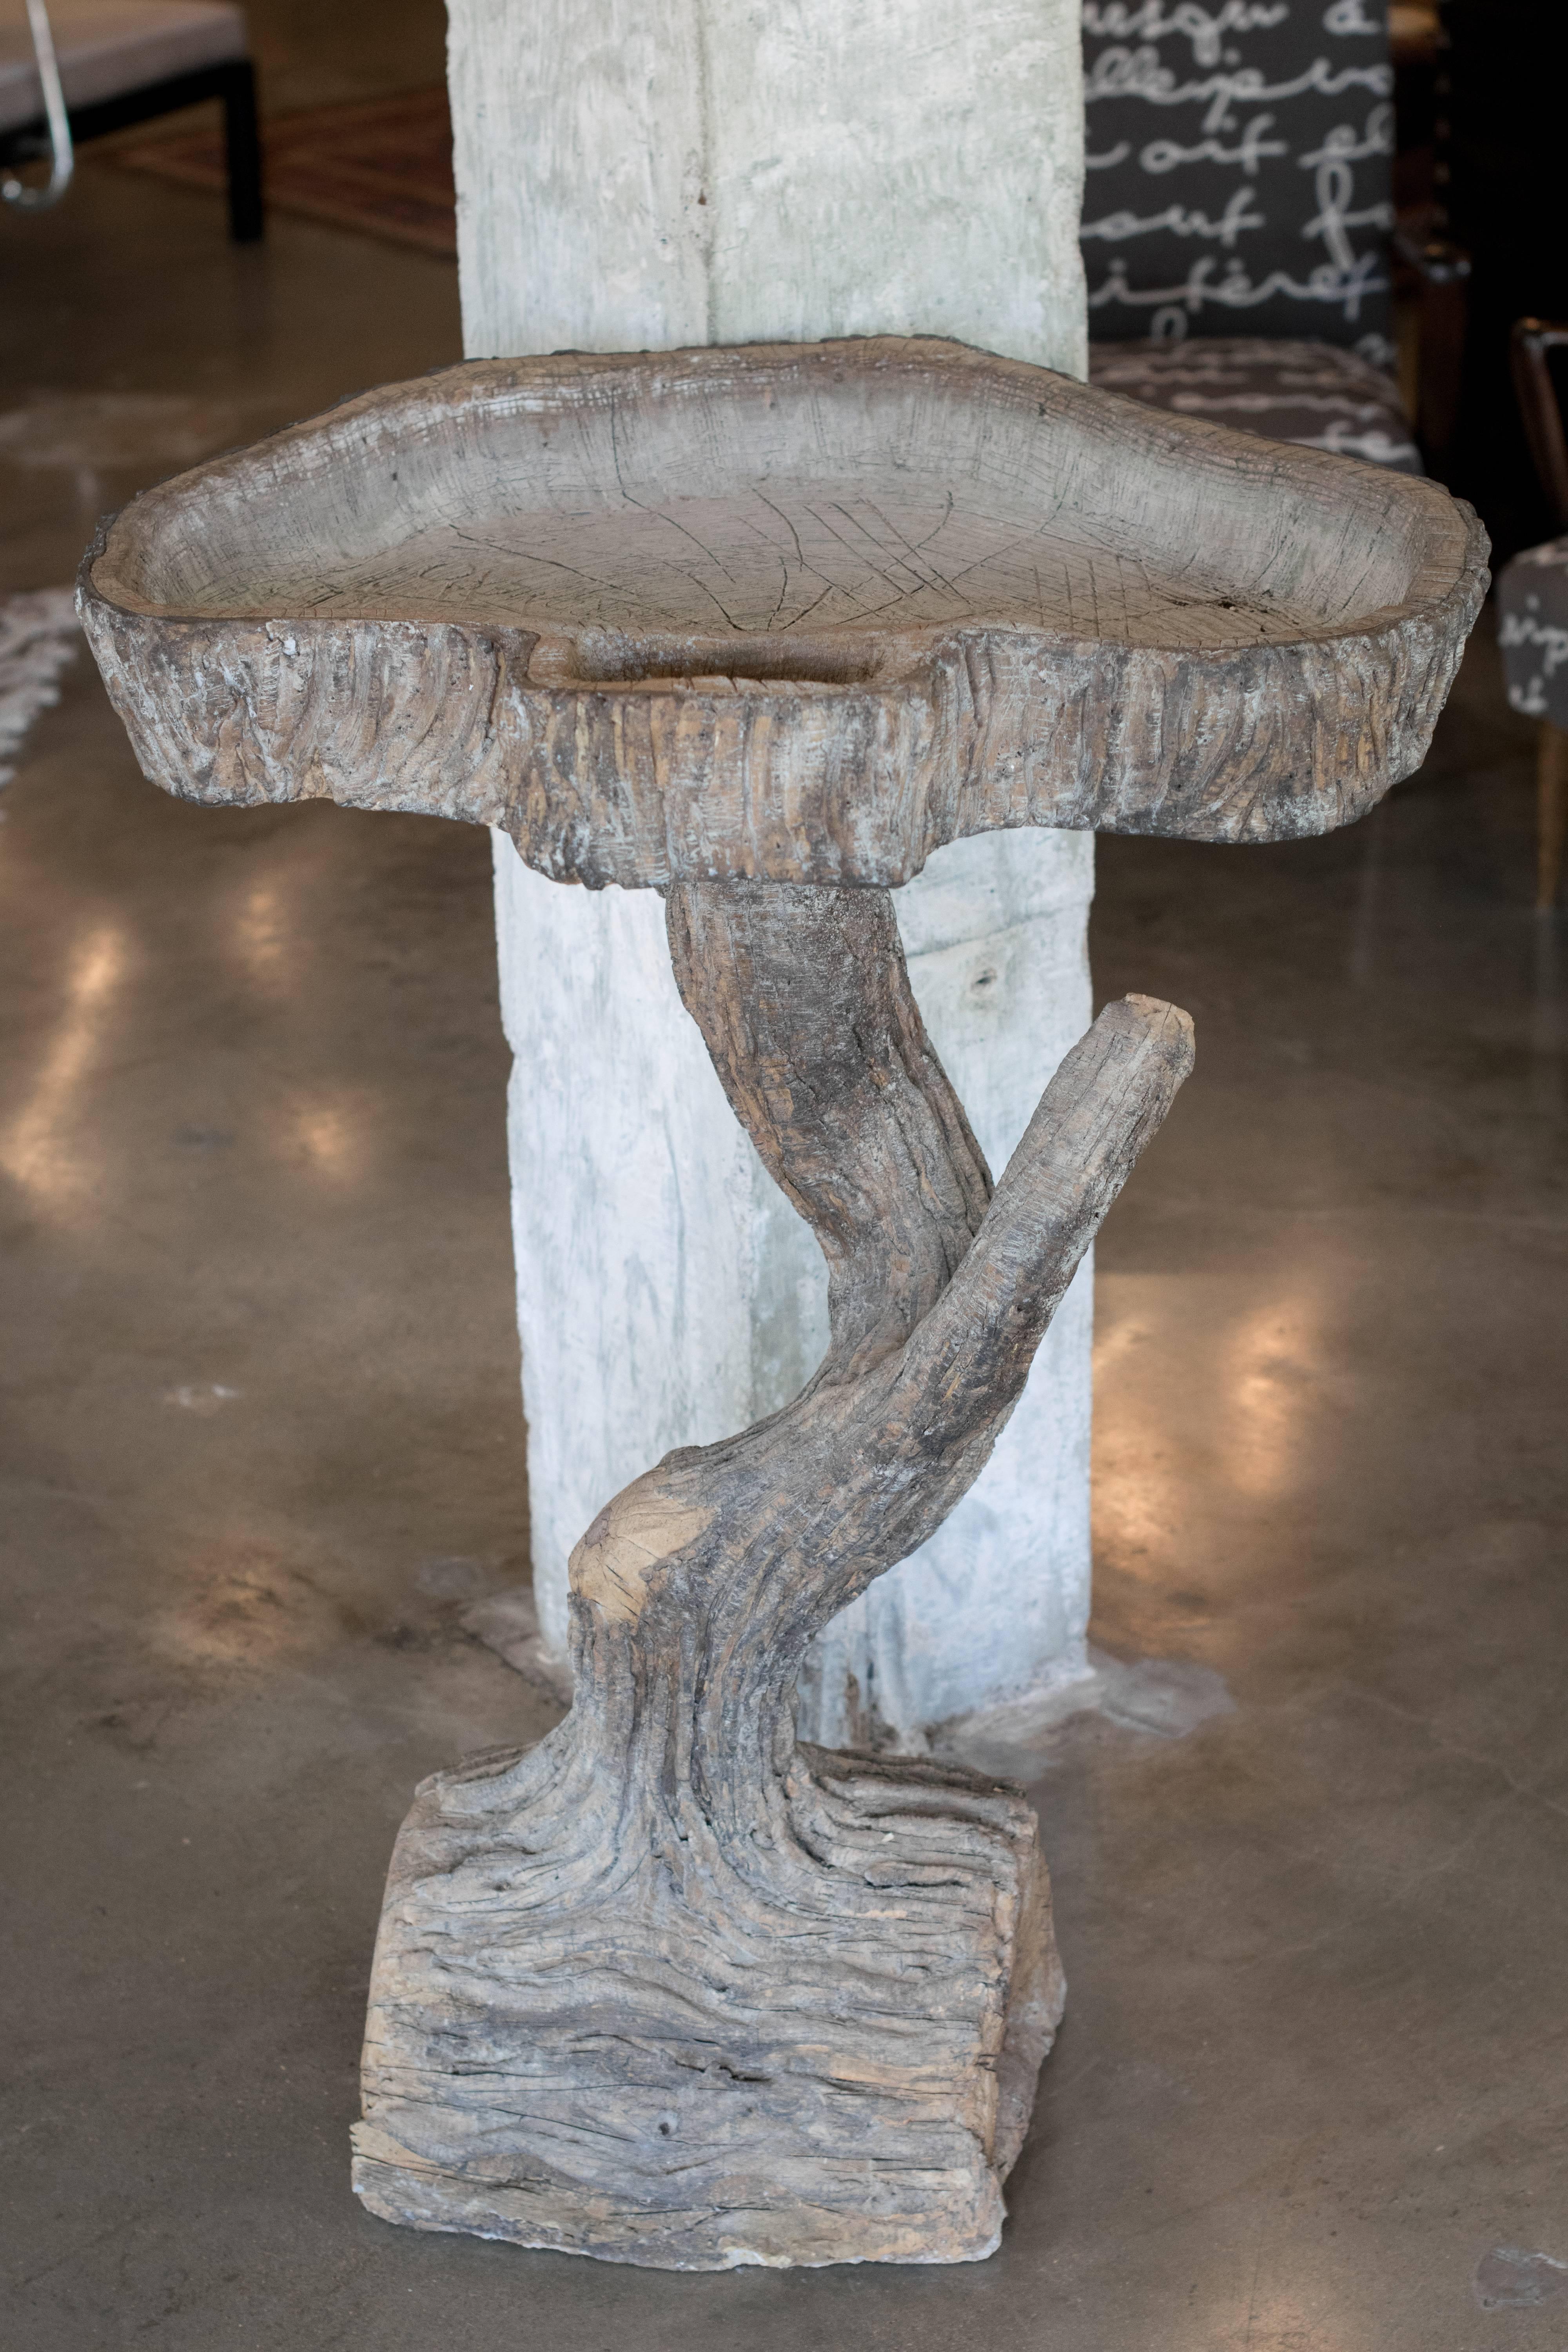 Sculptor Rene Romero of San Antonio, Texas learned the art of faux bois from famed master artisan Carlos Cortes. Signed by Romero, this sculpted concrete stand serves decoratively in an interior or within the garden as a birdbath. There is a smaller